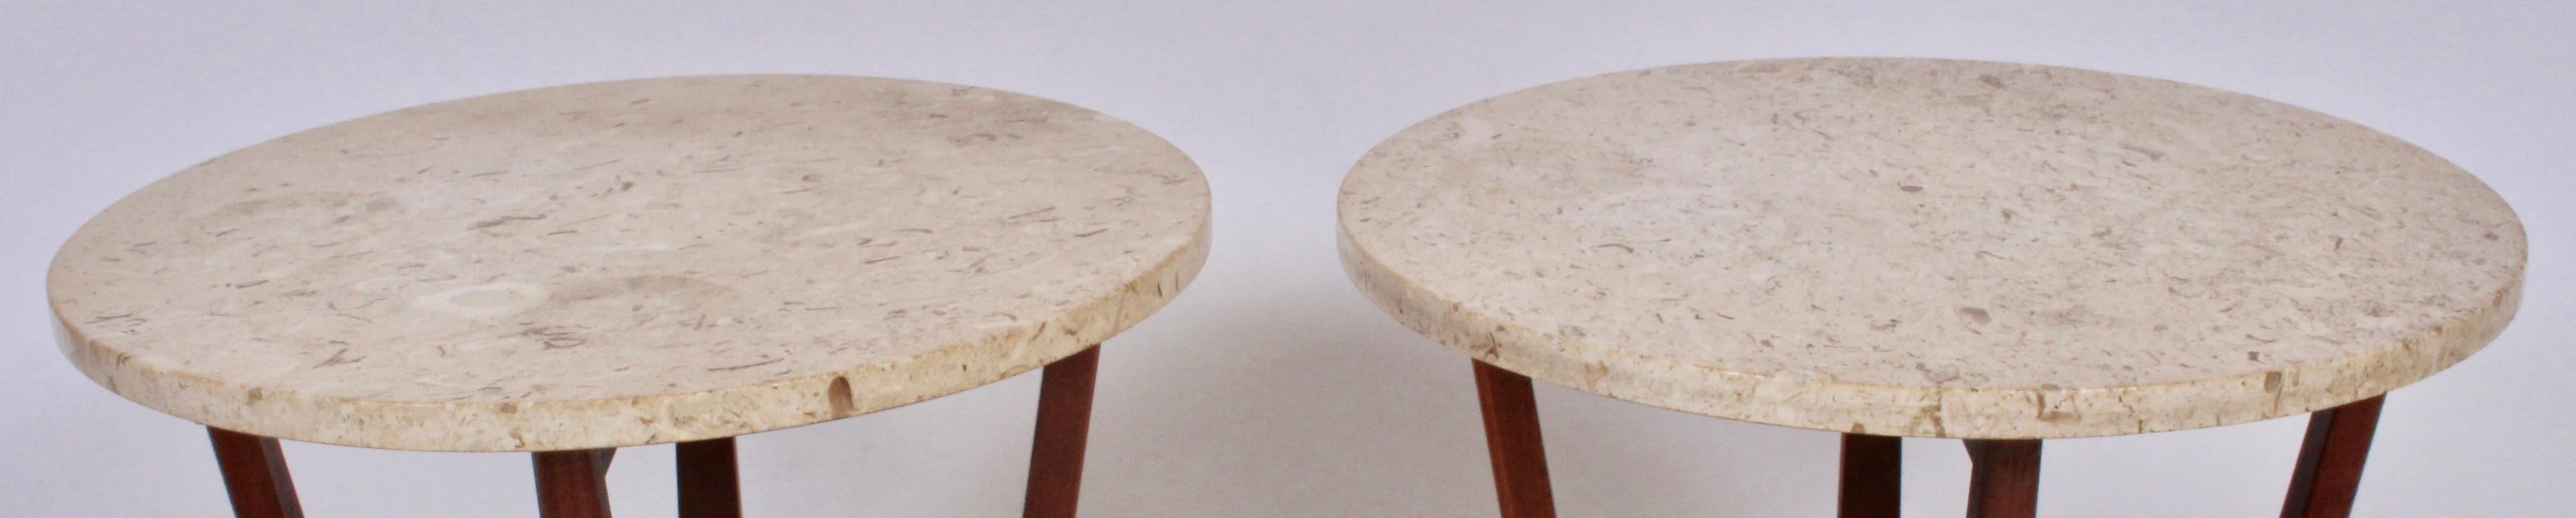 20th Century Pair of Lane American Mid-Century Modern Walnut and Round Travertine End Tables